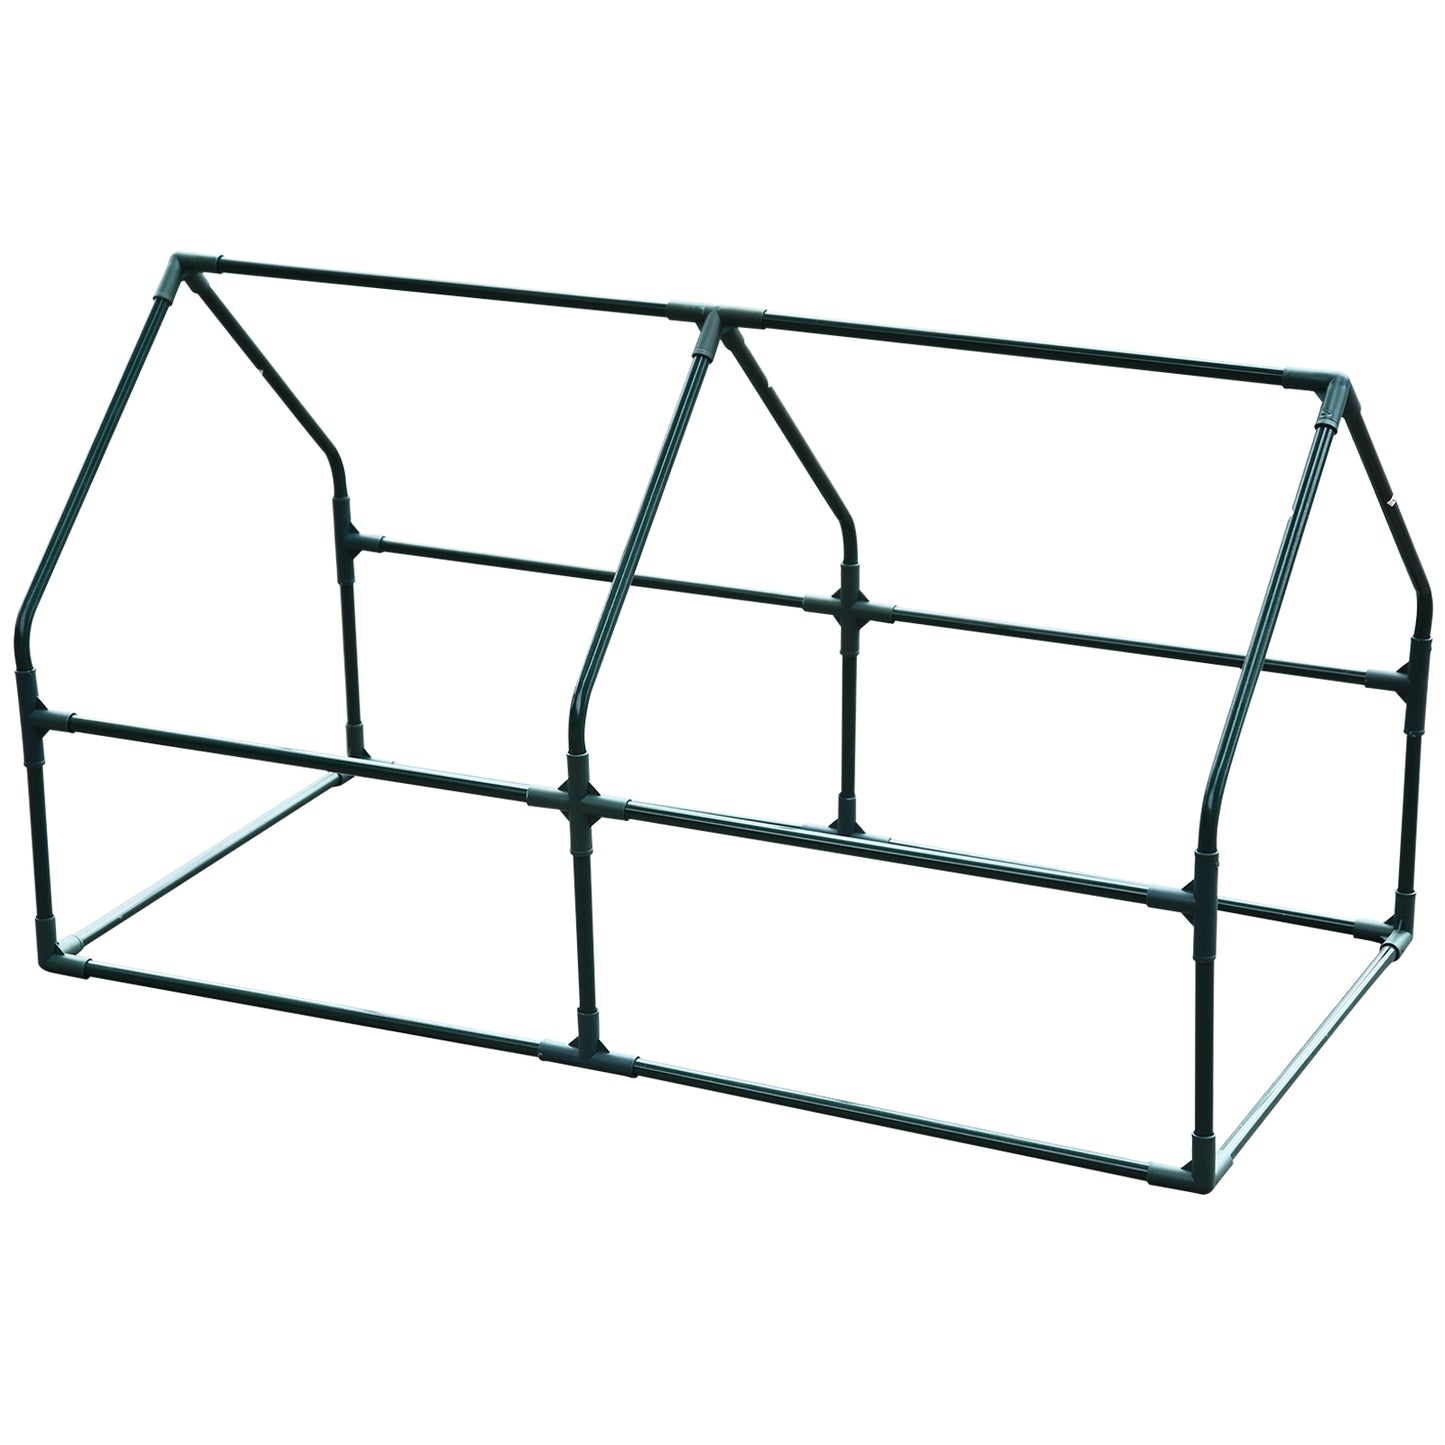 Outsunny Greenhouse W/ 2 Windows, 120Lx60Wx60H cm, Steel Frame-Green